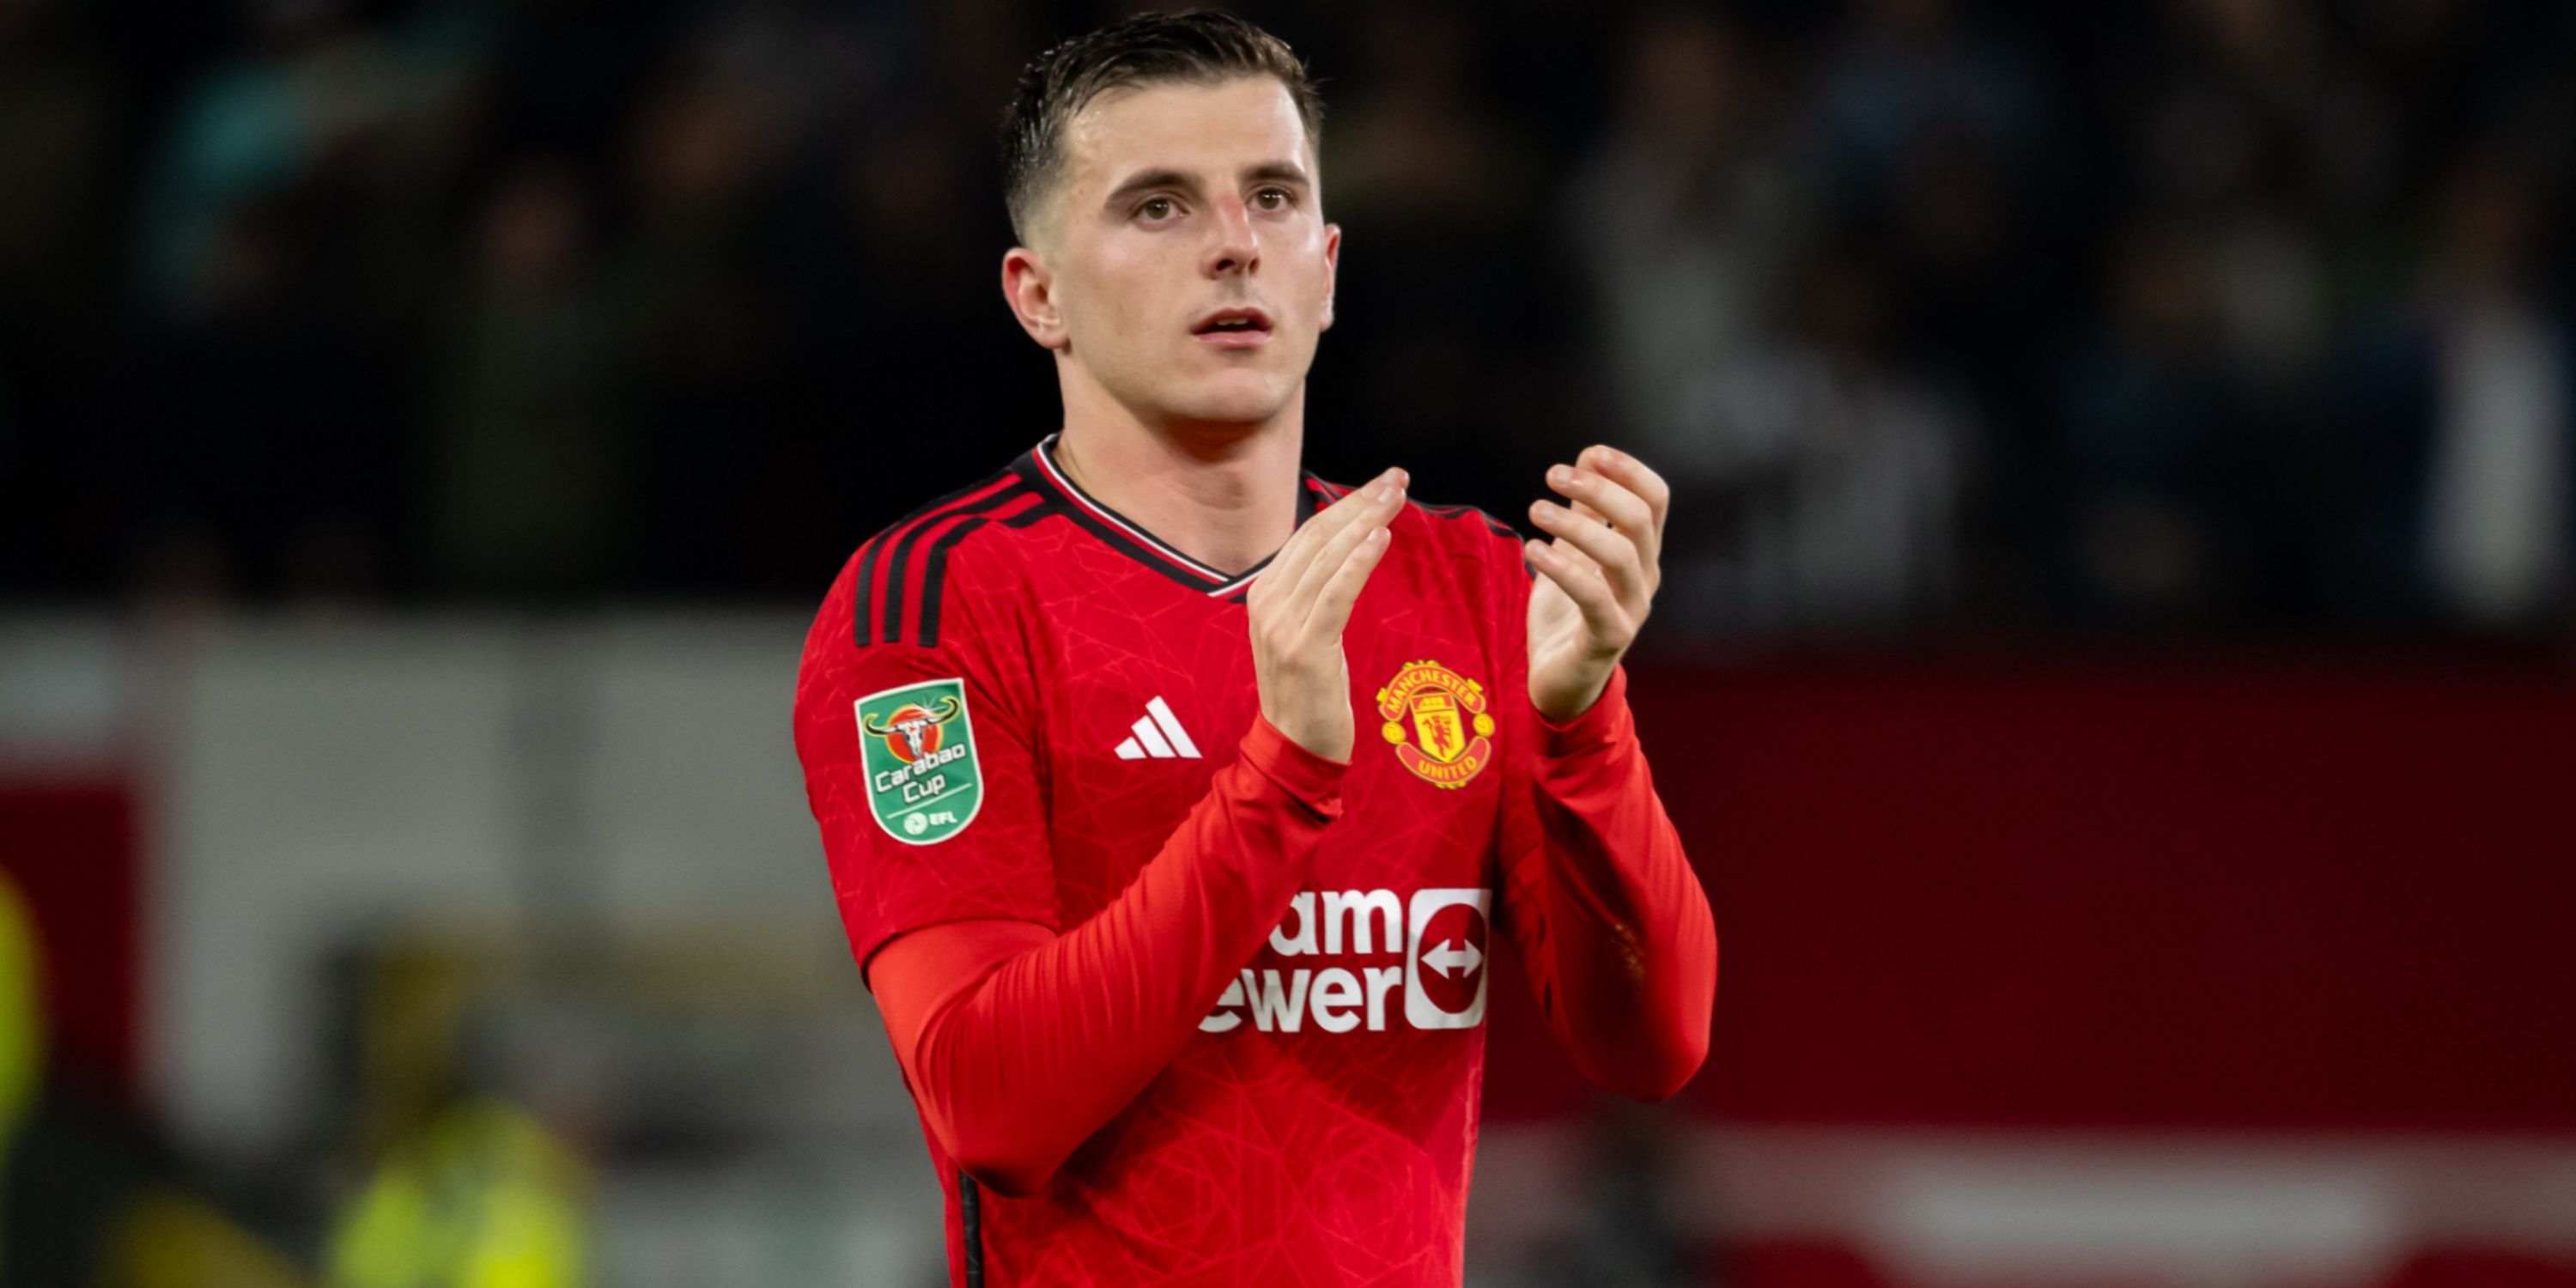 Mason Mount praised for actions after Manchester United’s 3-0 defeat to Newcastle